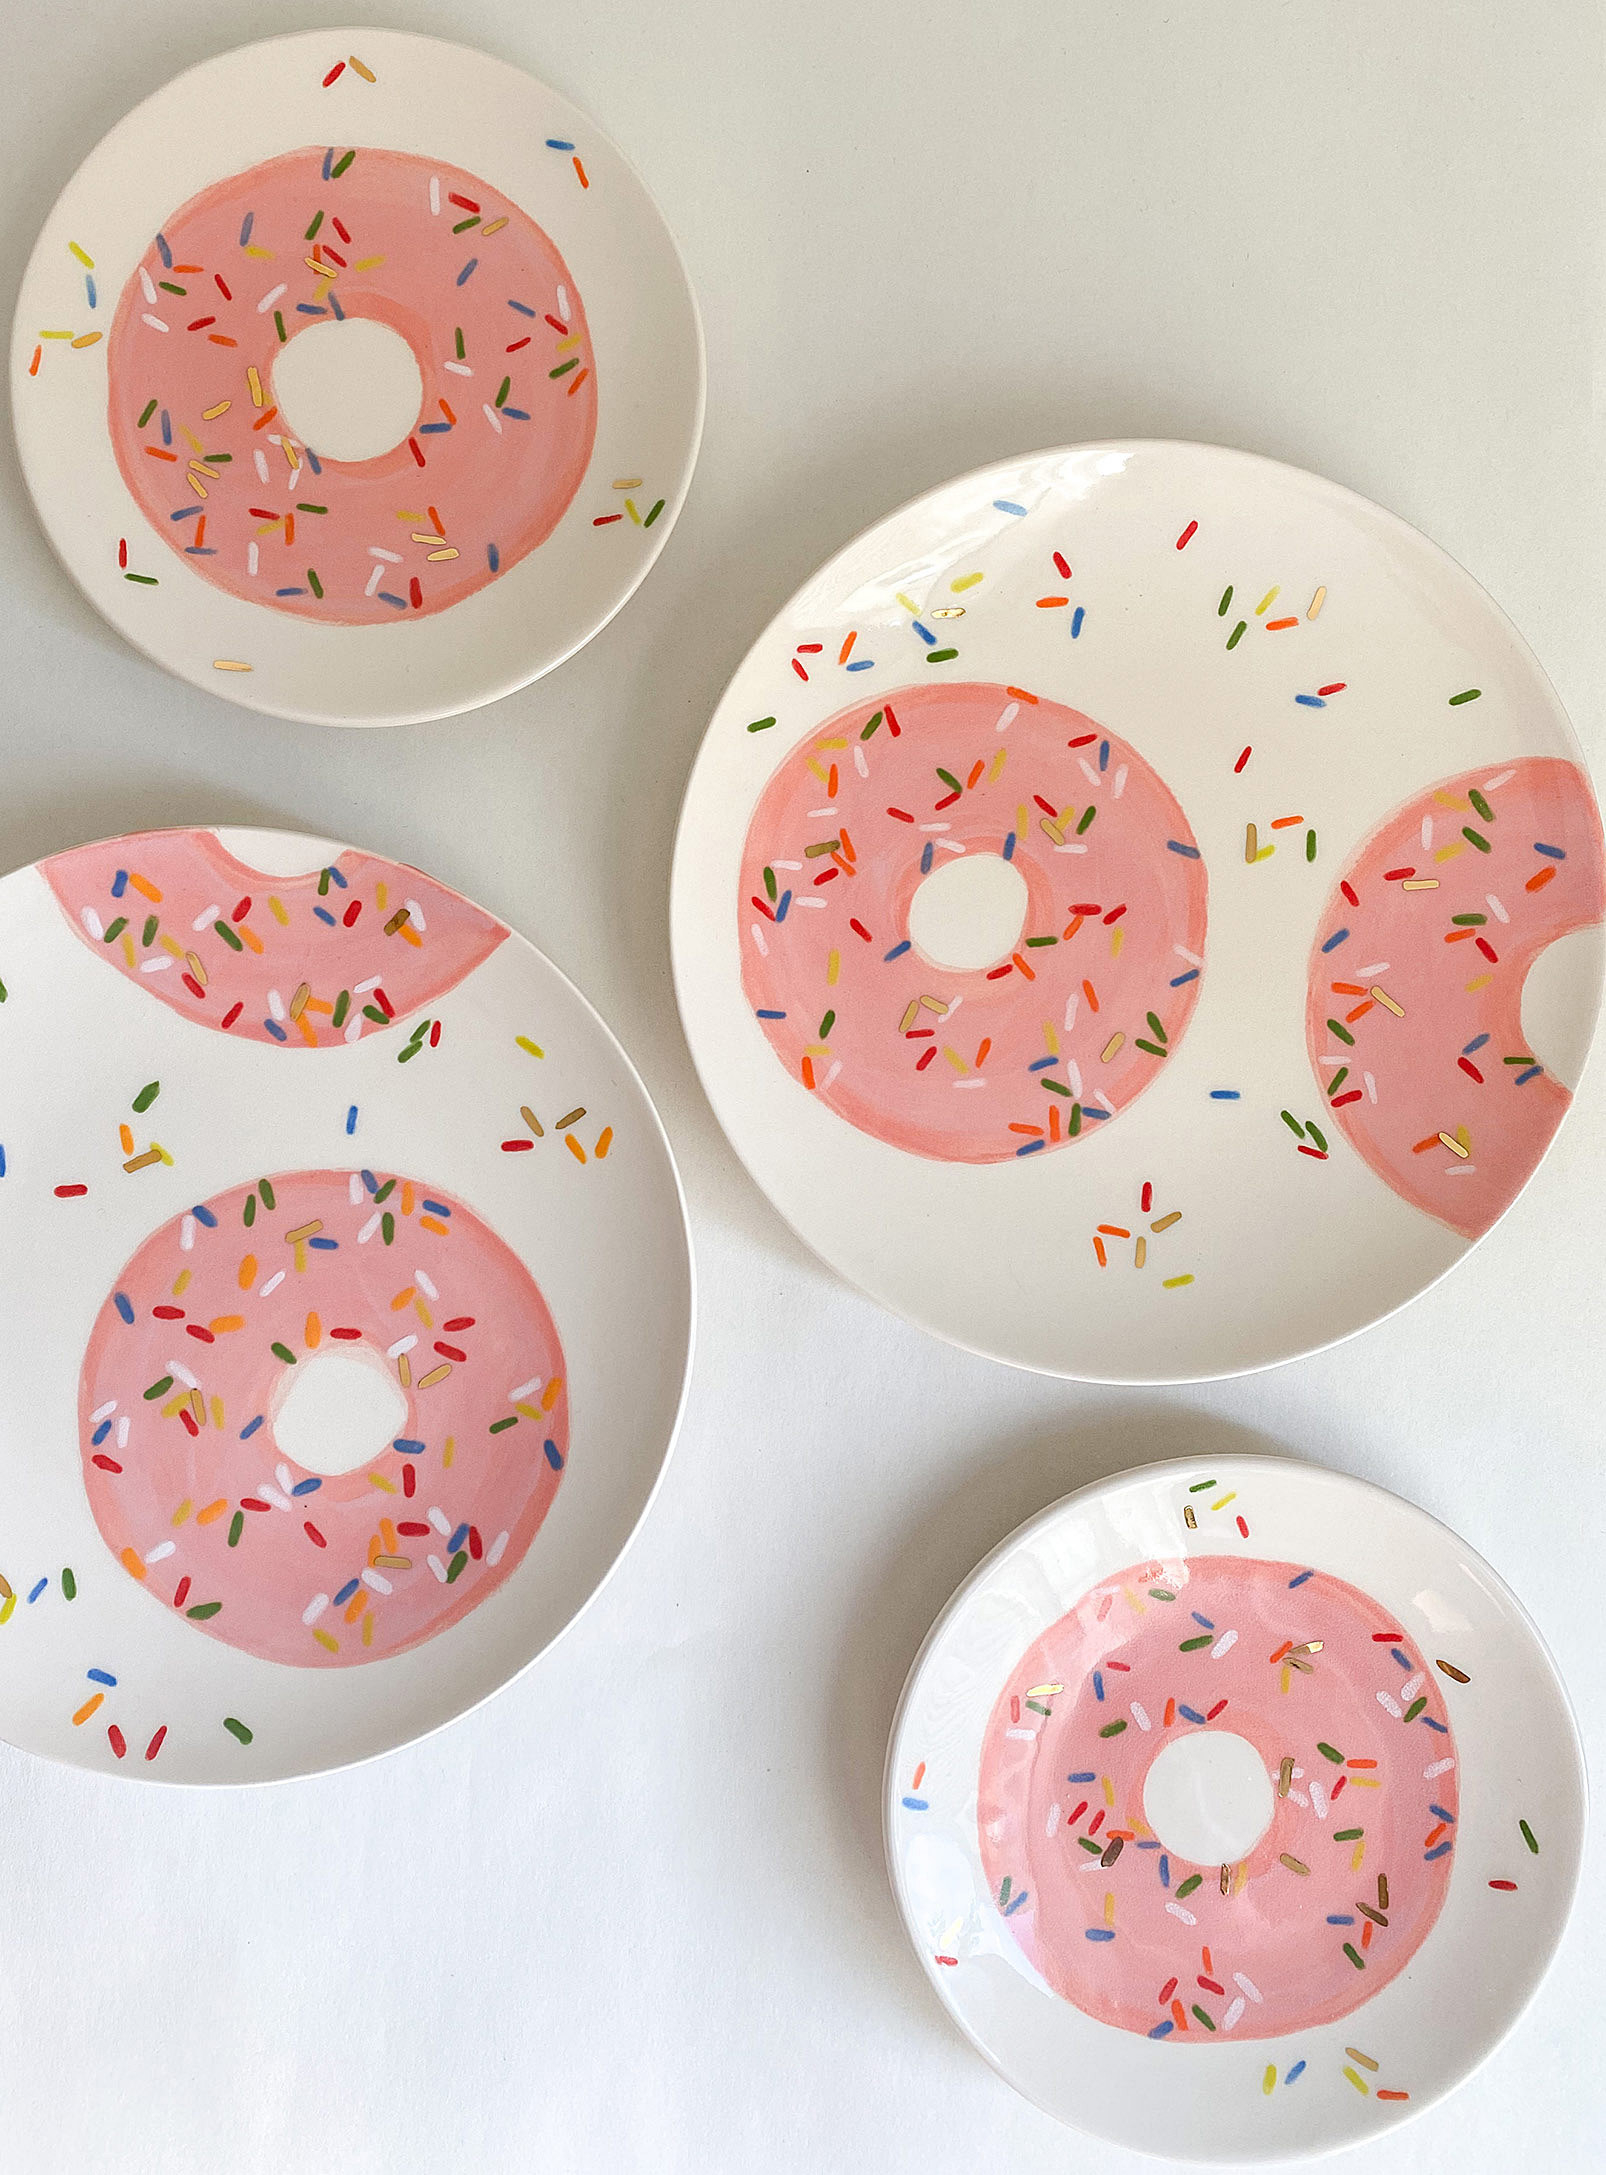 Four ceramic plates with donuts painted onto them